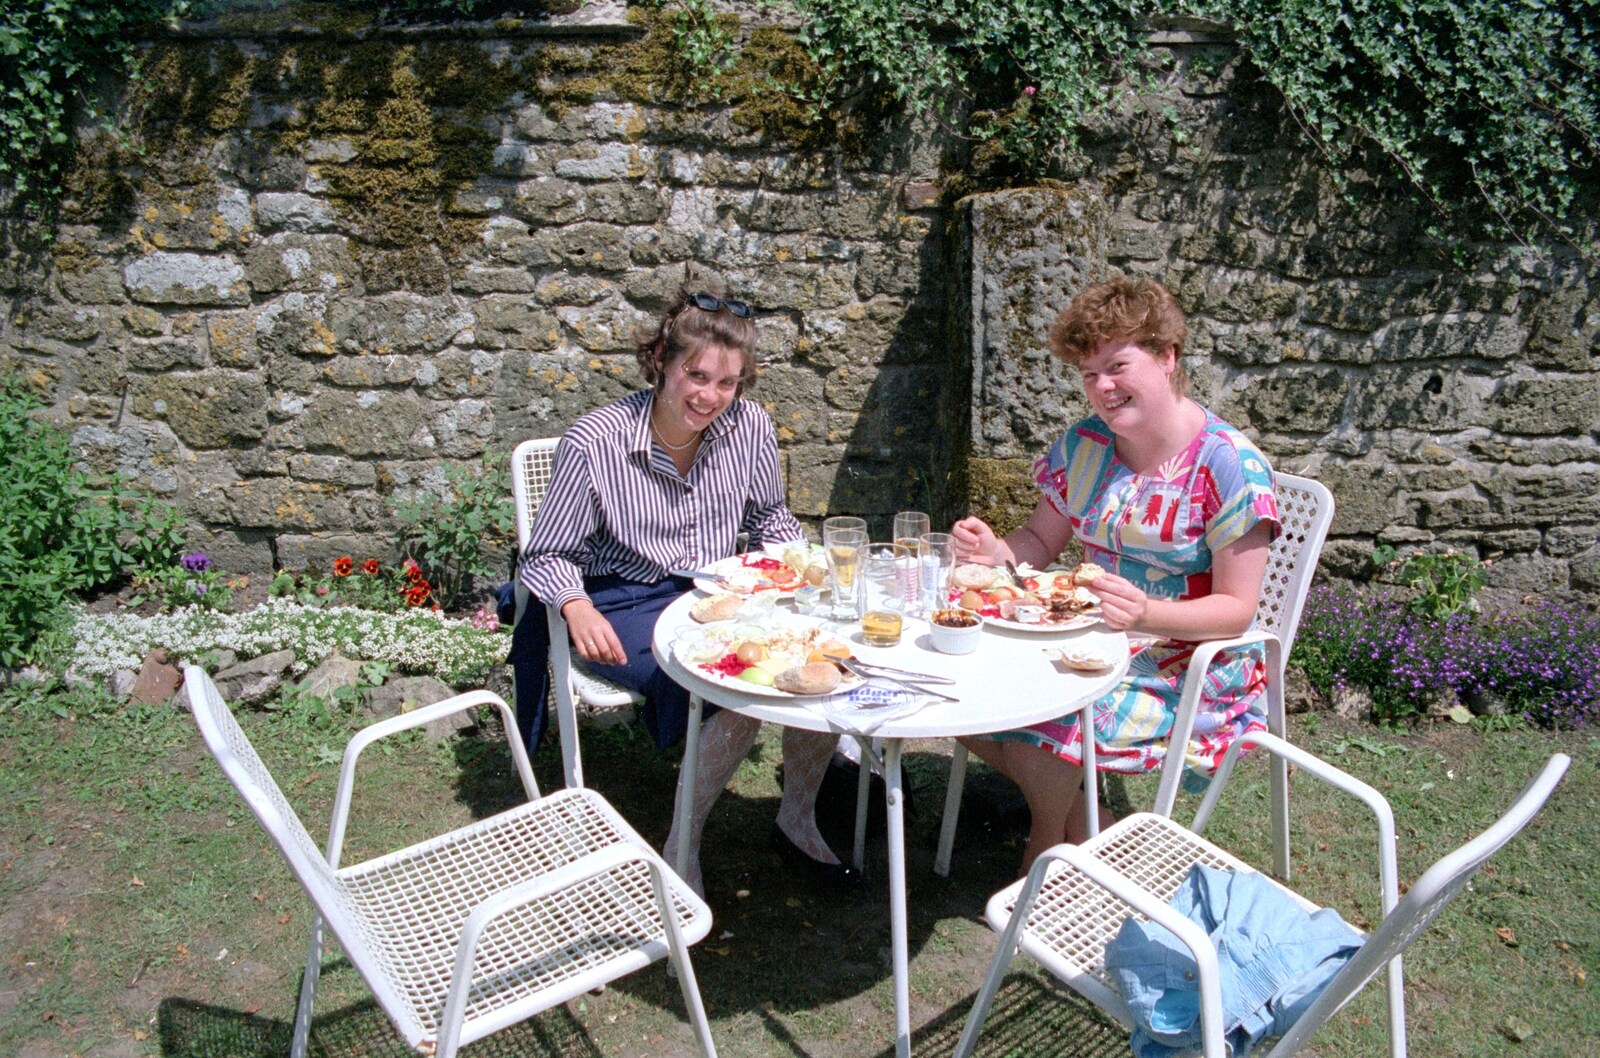 Uni: A Trip to Swindon, Shaftesbury, and the Tamar Bridge, Wiltshire, Dorset and Devon - 28th May 1989: Michelle and Kate in a pub garden in Shaftesbury